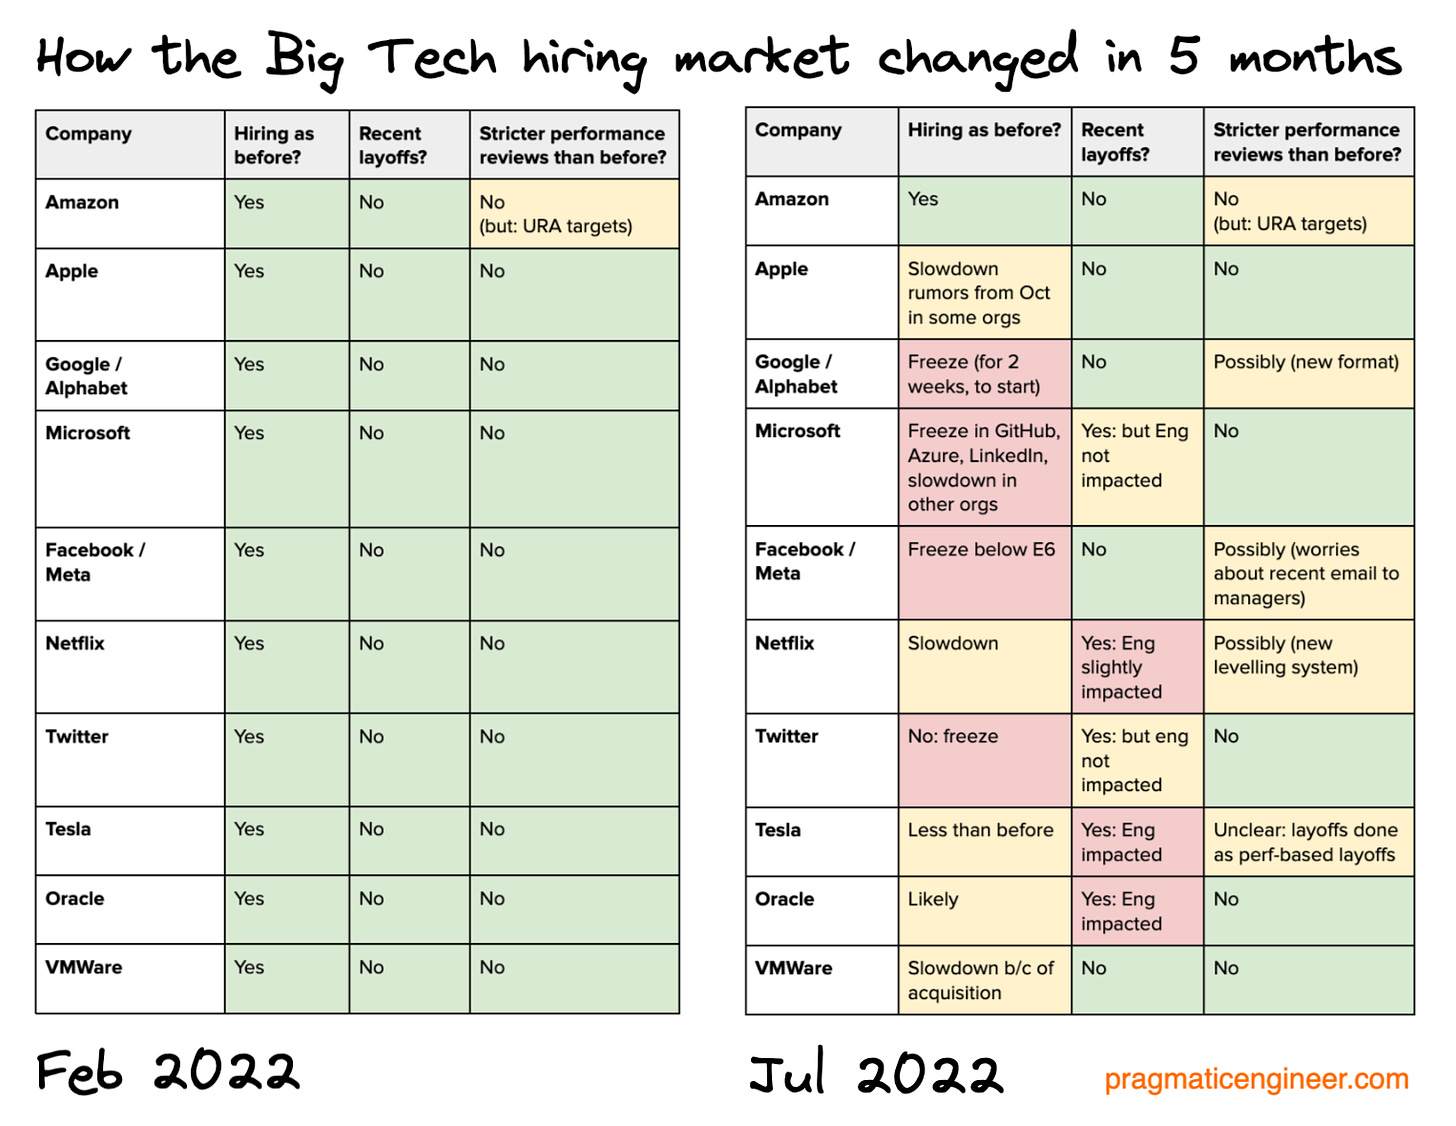 How the Big Tech hiring market changed in 5 months